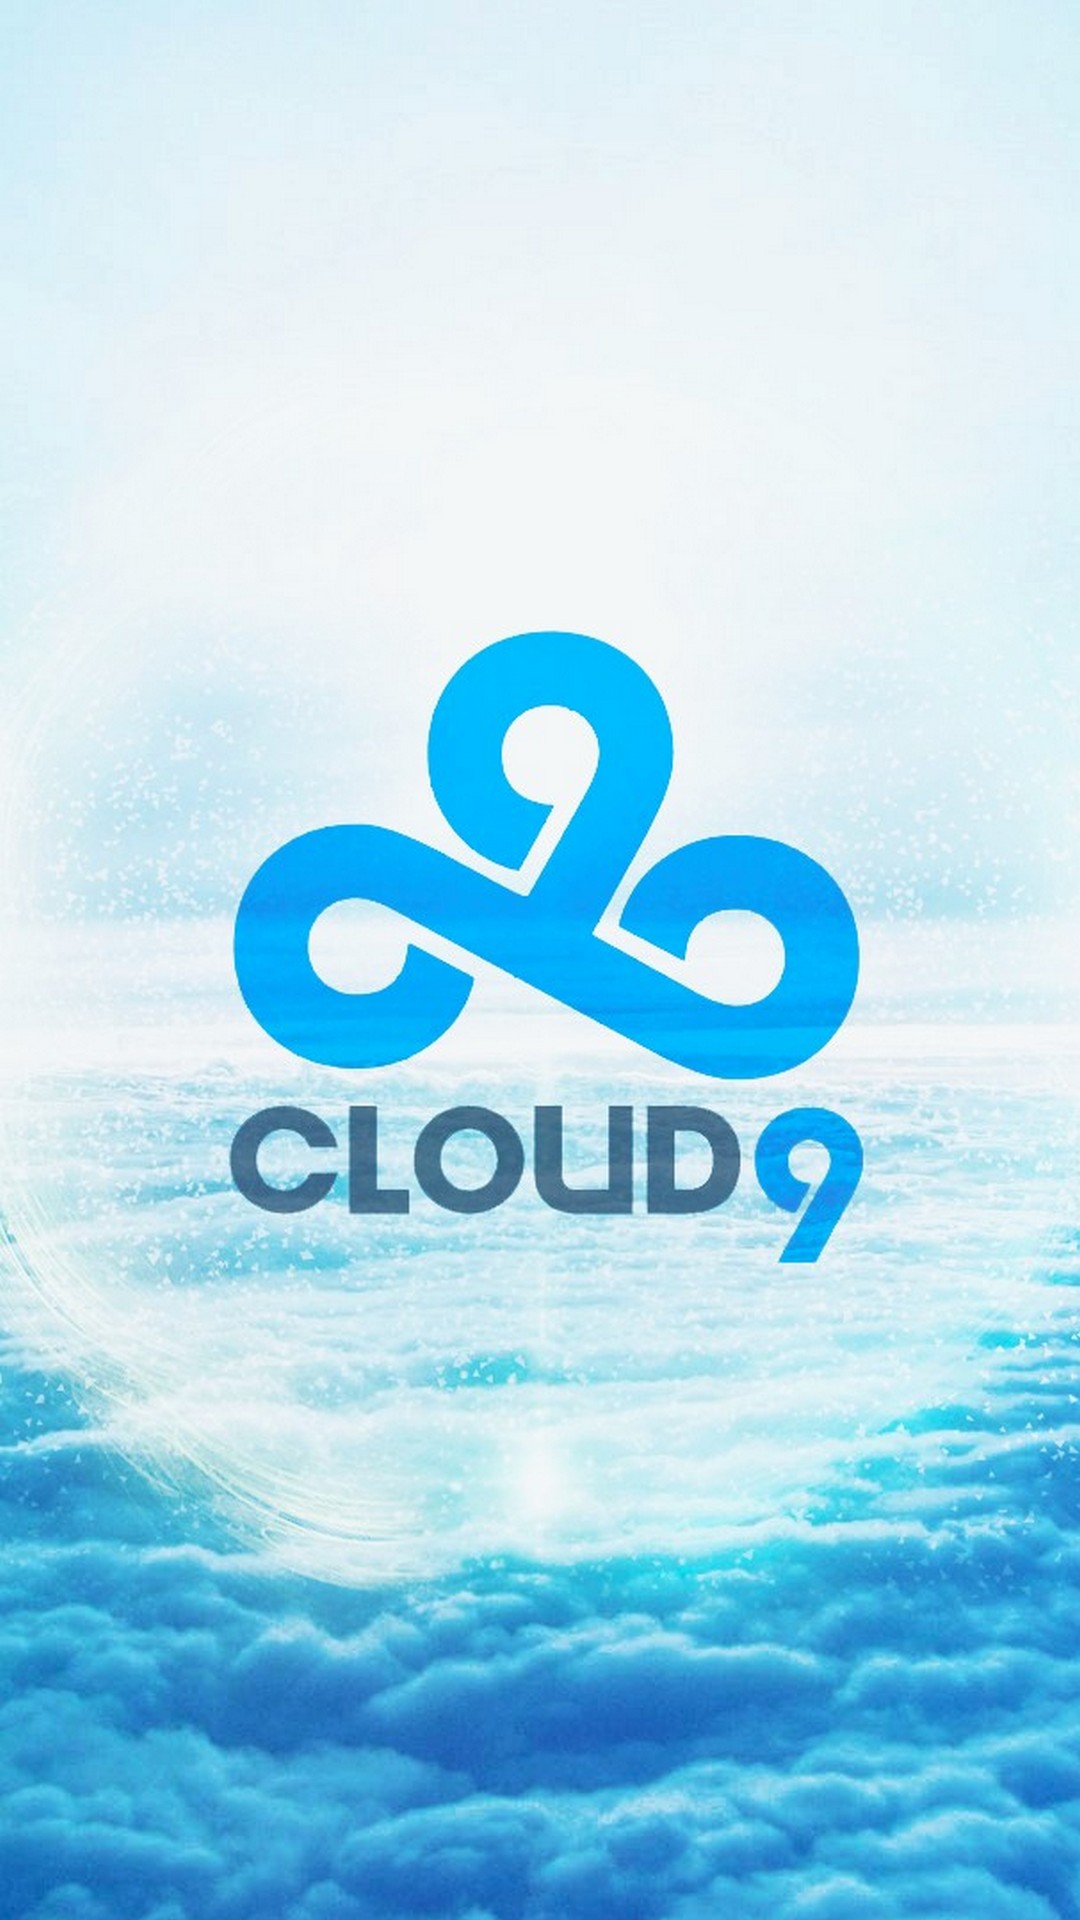 Cloud9 Bacground For iPhone 8 1080x1920